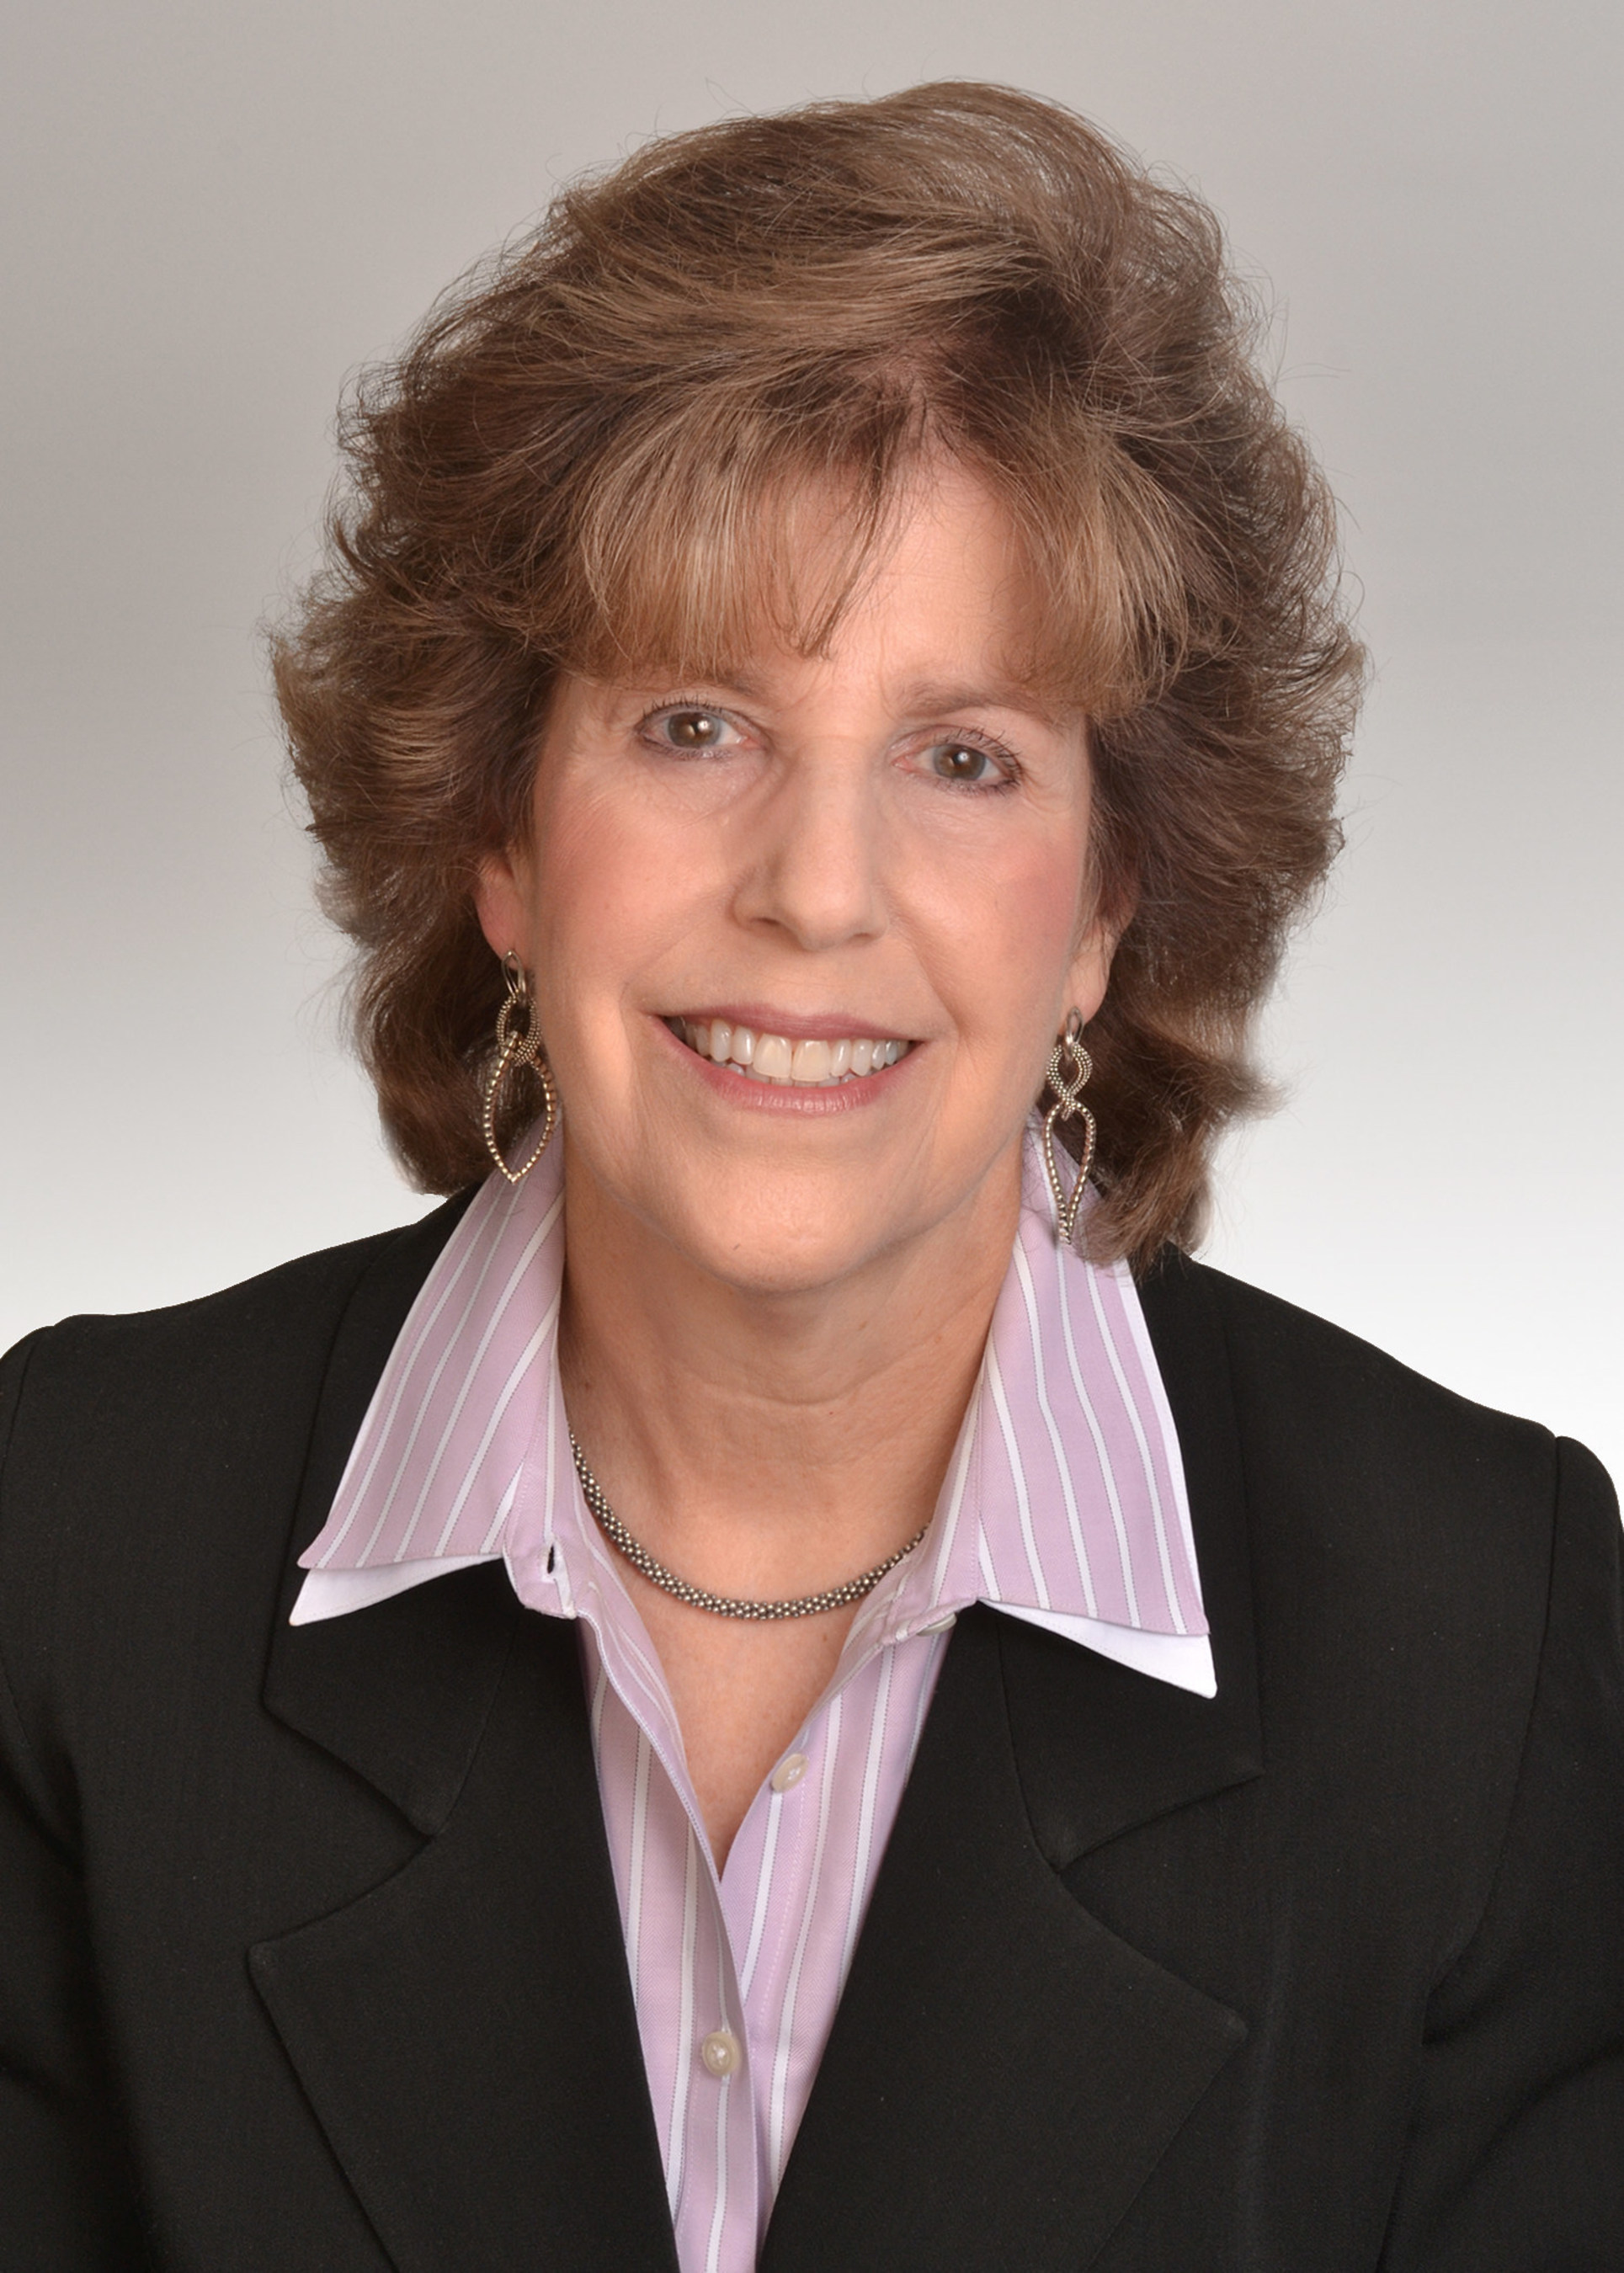 Alice Jacobs, M.D. Former AHA president Chair of AHA GTO advisory group Professor of Medicine and Vice Chair for Clinical Affairs Department of Medicine, Boston University Medical Center.